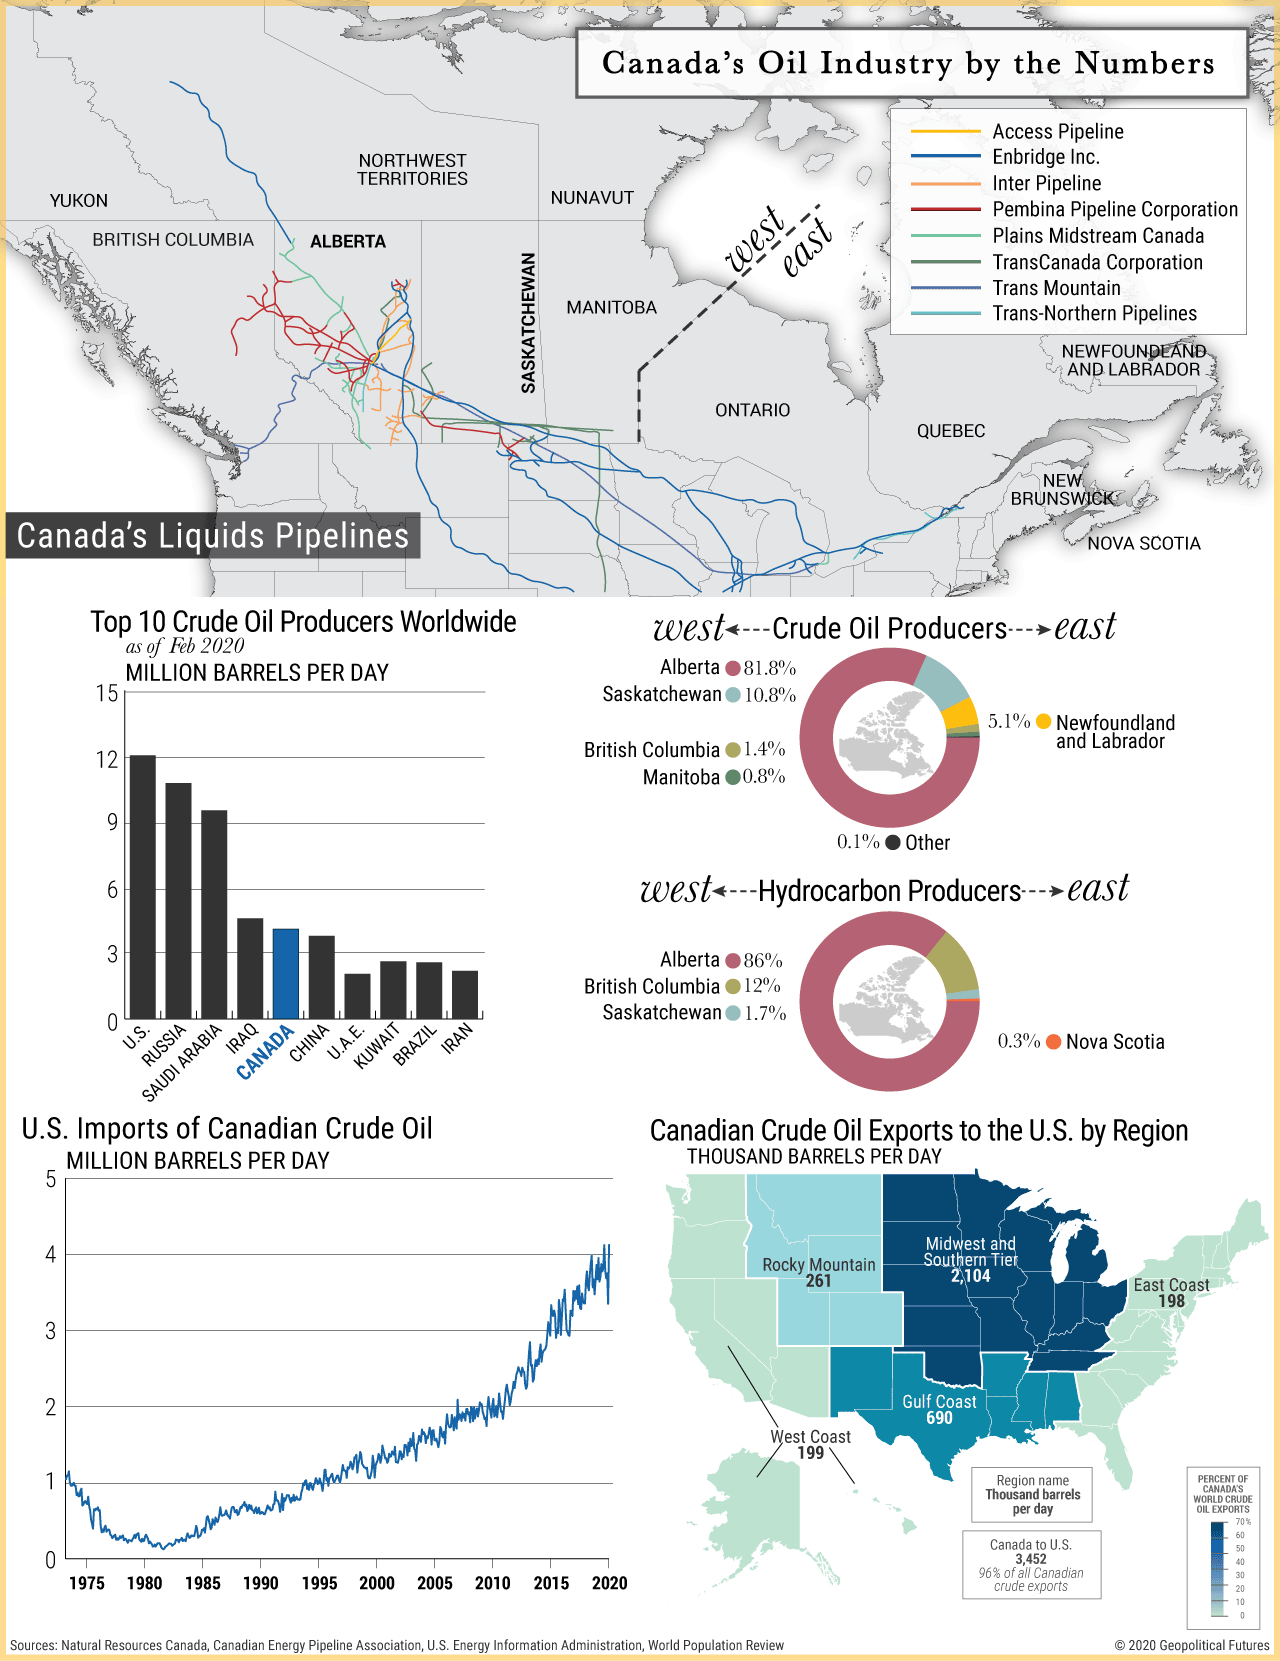 Canada's Oil Industry by the Numbers